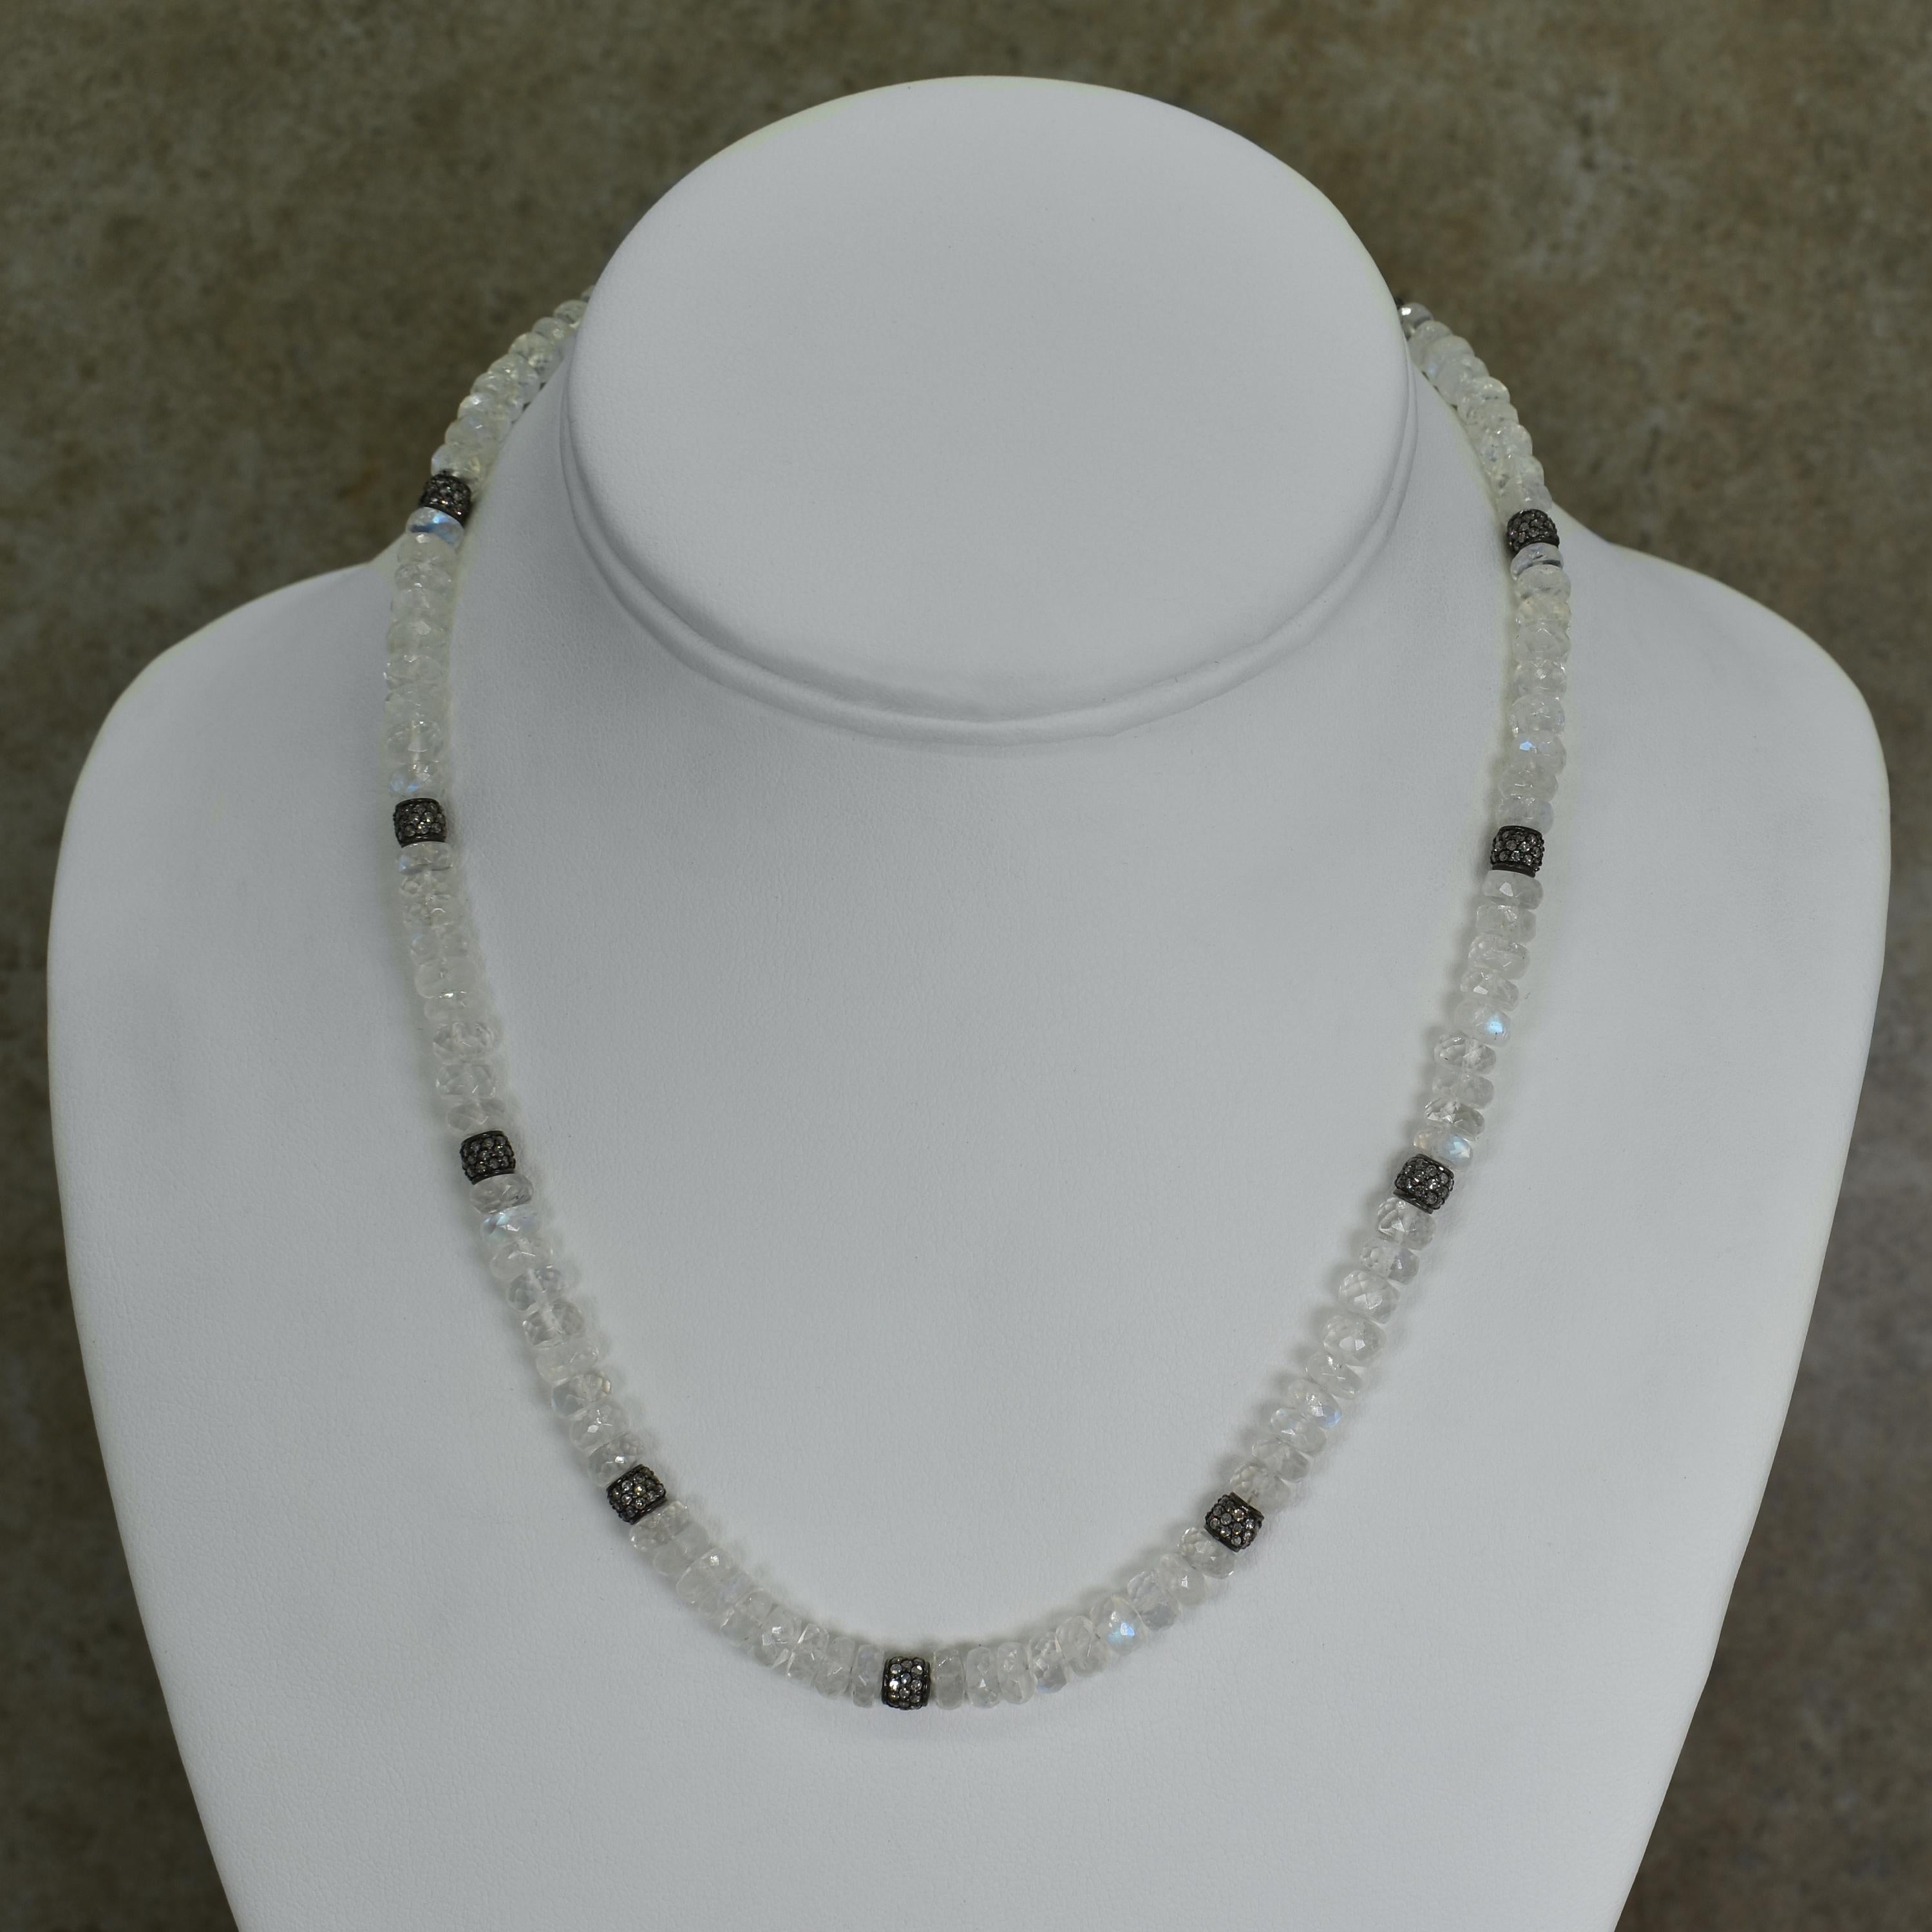 Faceted roundel shaped rainbow Moonstone, pavé white Diamond and oxidized sterling silver beaded necklace. Necklace is 17 inches in length, and is finished with a pavé Diamond lobster clasp. Perfect on its own or an excellent layering piece to dress